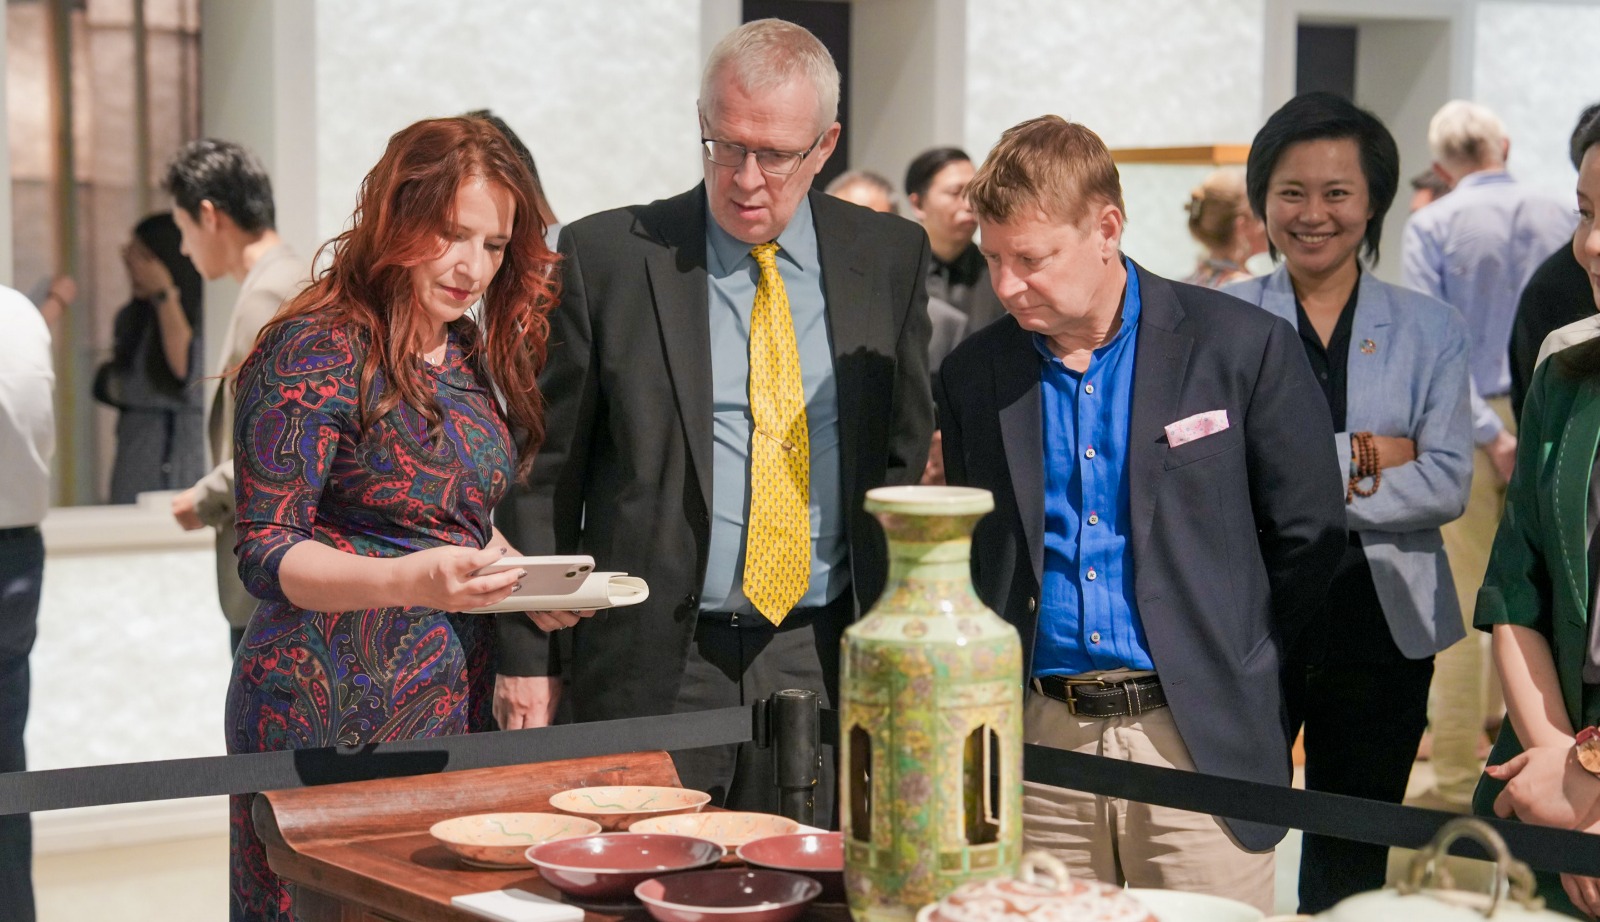 Exhibition guests marvelling a revolving floral vase from the late Qing Dynasty (19th century)